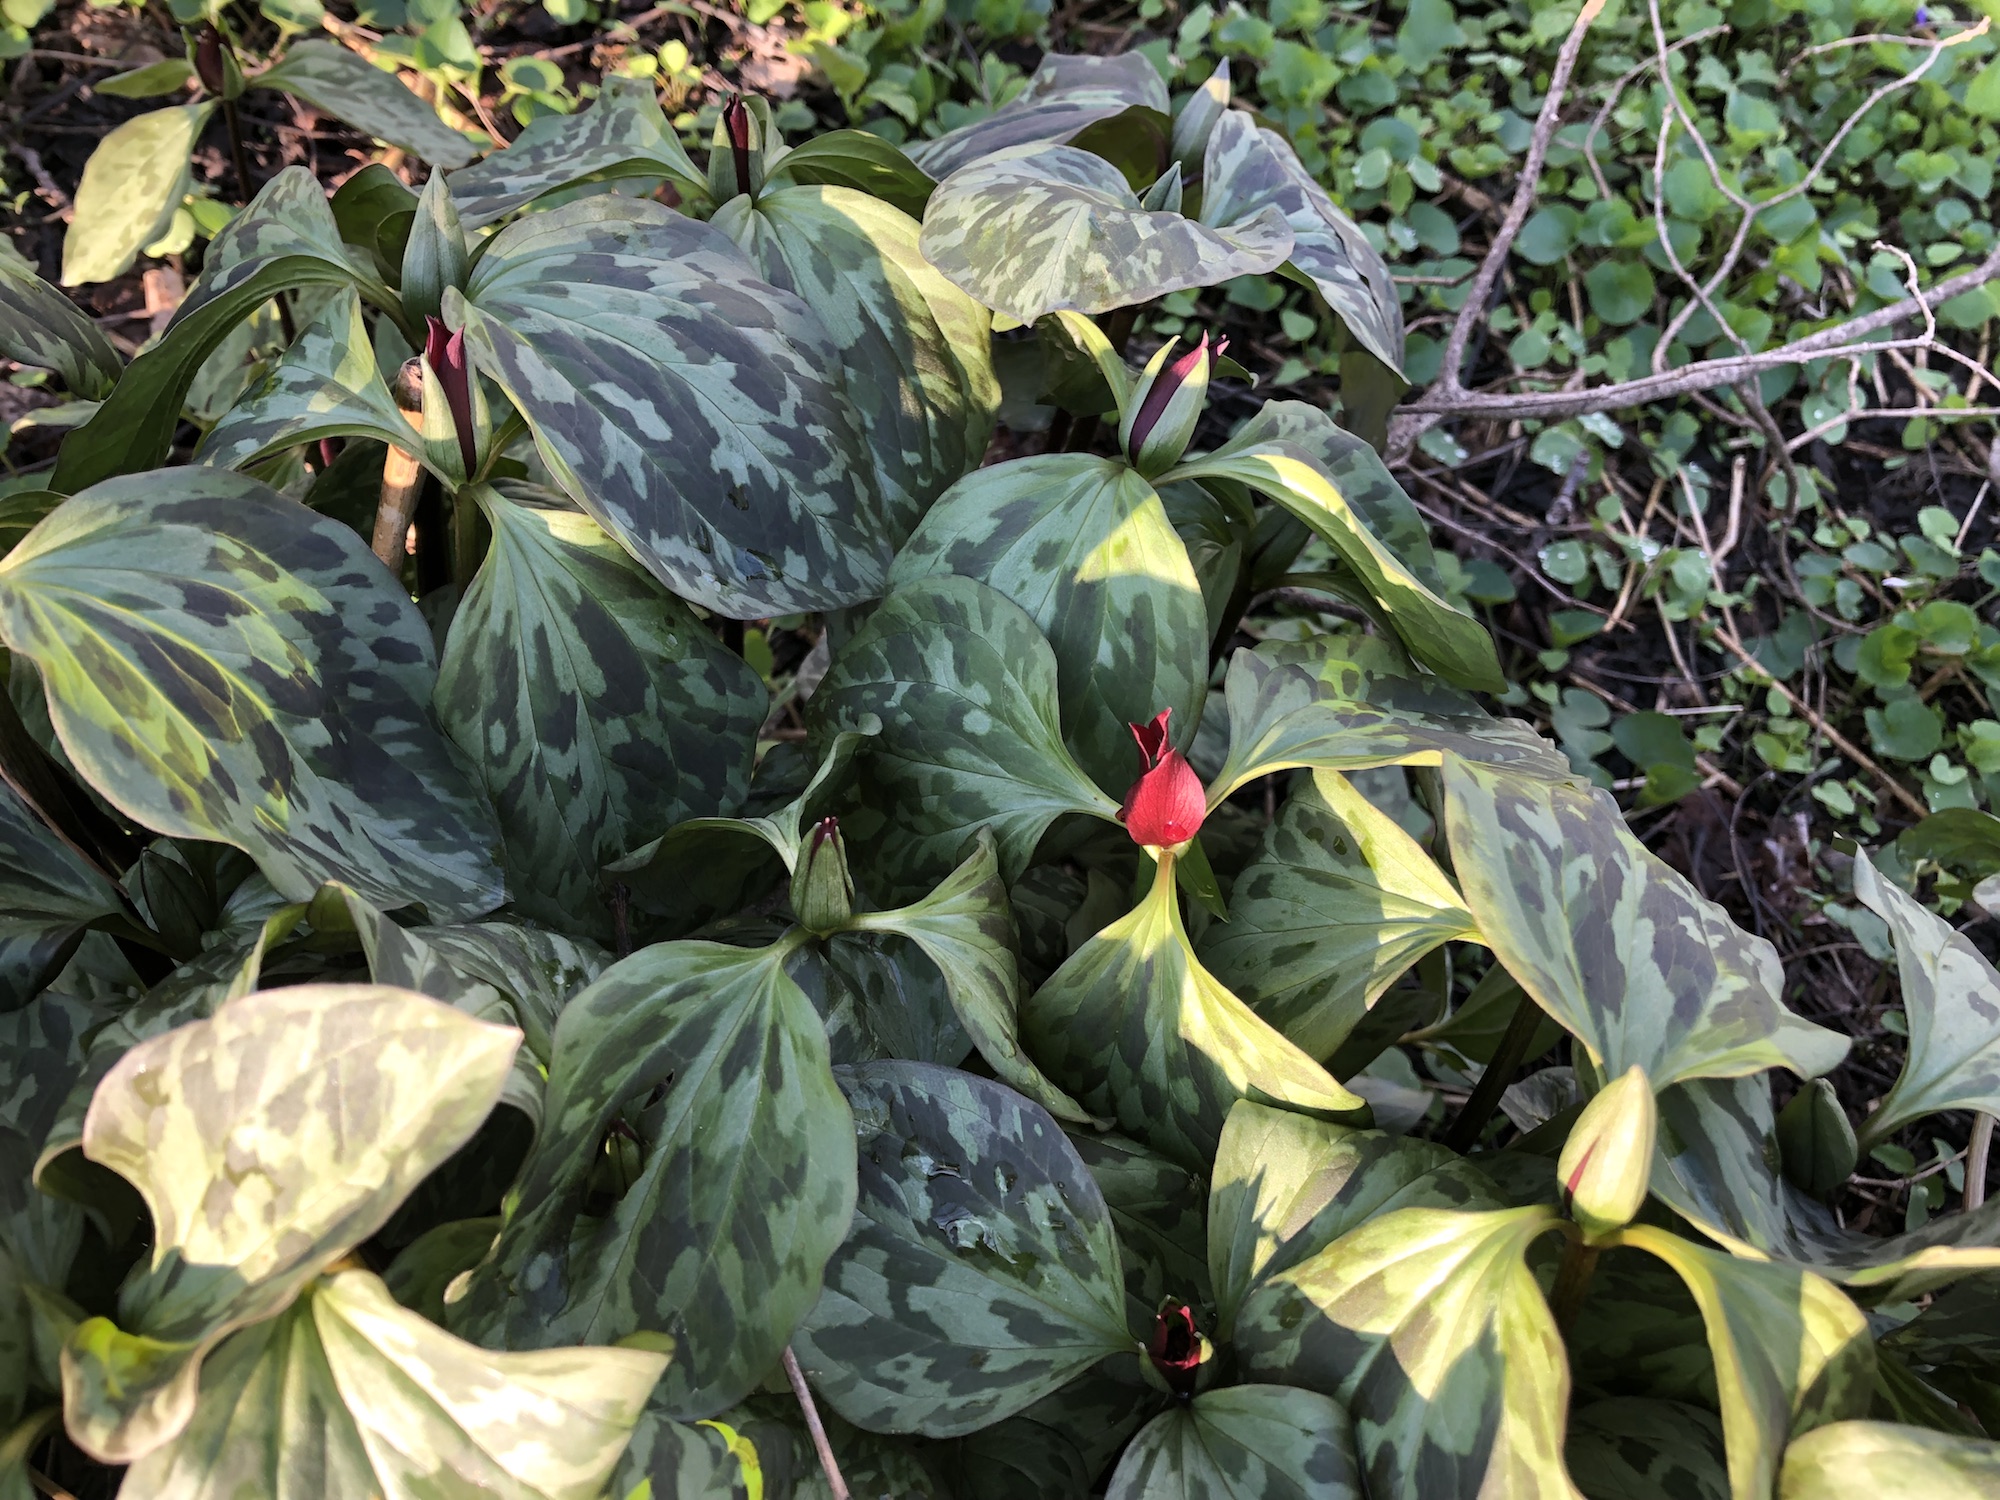 Trillium off of bike path between Marion Dunn and Duck Pond on April 26, 2019.